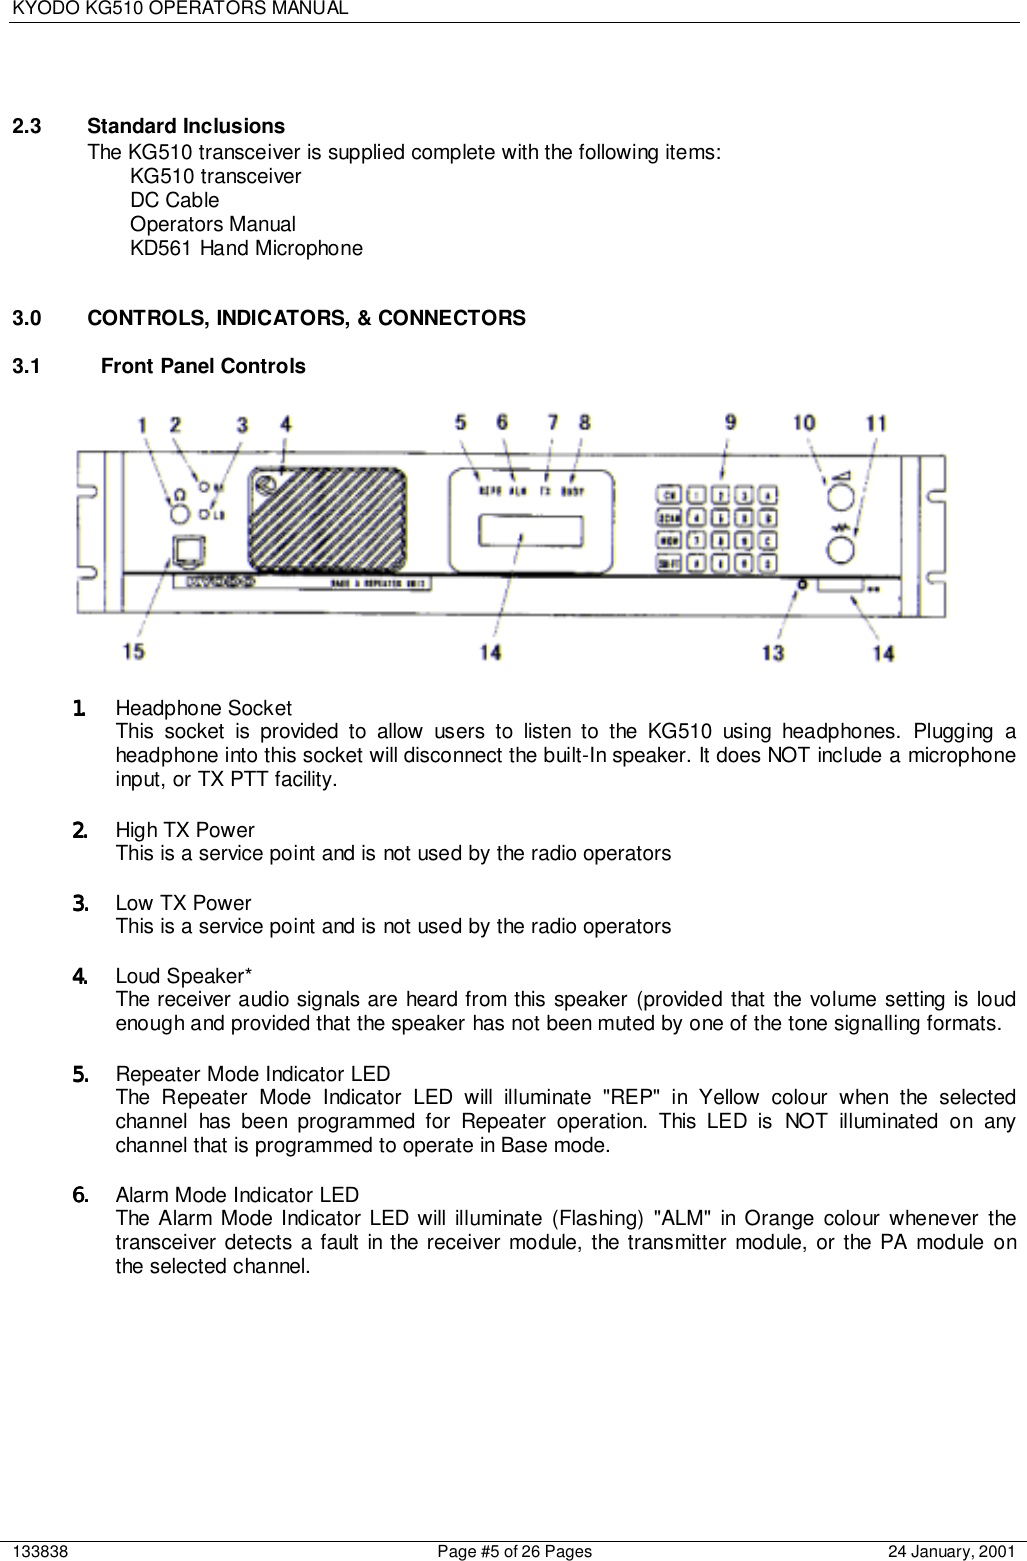 KYODO KG510 OPERATORS MANUAL133838 Page #5 of 26 Pages 24 January, 20012.3 Standard InclusionsThe KG510 transceiver is supplied complete with the following items:KG510 transceiverDC CableOperators ManualKD561 Hand Microphone3.0  CONTROLS, INDICATORS, &amp; CONNECTORS3.1  Front Panel Controls 1.1.1.1. Headphone SocketThis socket is provided to allow users to listen to the KG510 using headphones. Plugging aheadphone into this socket will disconnect the built-In speaker. It does NOT include a microphoneinput, or TX PTT facility.2.2.2.2. High TX PowerThis is a service point and is not used by the radio operators3.3.3.3. Low TX PowerThis is a service point and is not used by the radio operators4.4.4.4. Loud Speaker*The receiver audio signals are heard from this speaker (provided that the volume setting is loudenough and provided that the speaker has not been muted by one of the tone signalling formats.5.5.5.5. Repeater Mode Indicator LEDThe Repeater Mode Indicator LED will illuminate &quot;REP&quot; in Yellow colour when the selectedchannel has been programmed for Repeater operation. This LED is NOT illuminated on anychannel that is programmed to operate in Base mode.6.6.6.6. Alarm Mode Indicator LEDThe Alarm Mode Indicator LED will illuminate (Flashing) &quot;ALM&quot; in Orange colour whenever thetransceiver detects a fault in the receiver module, the transmitter module, or the PA module onthe selected channel.